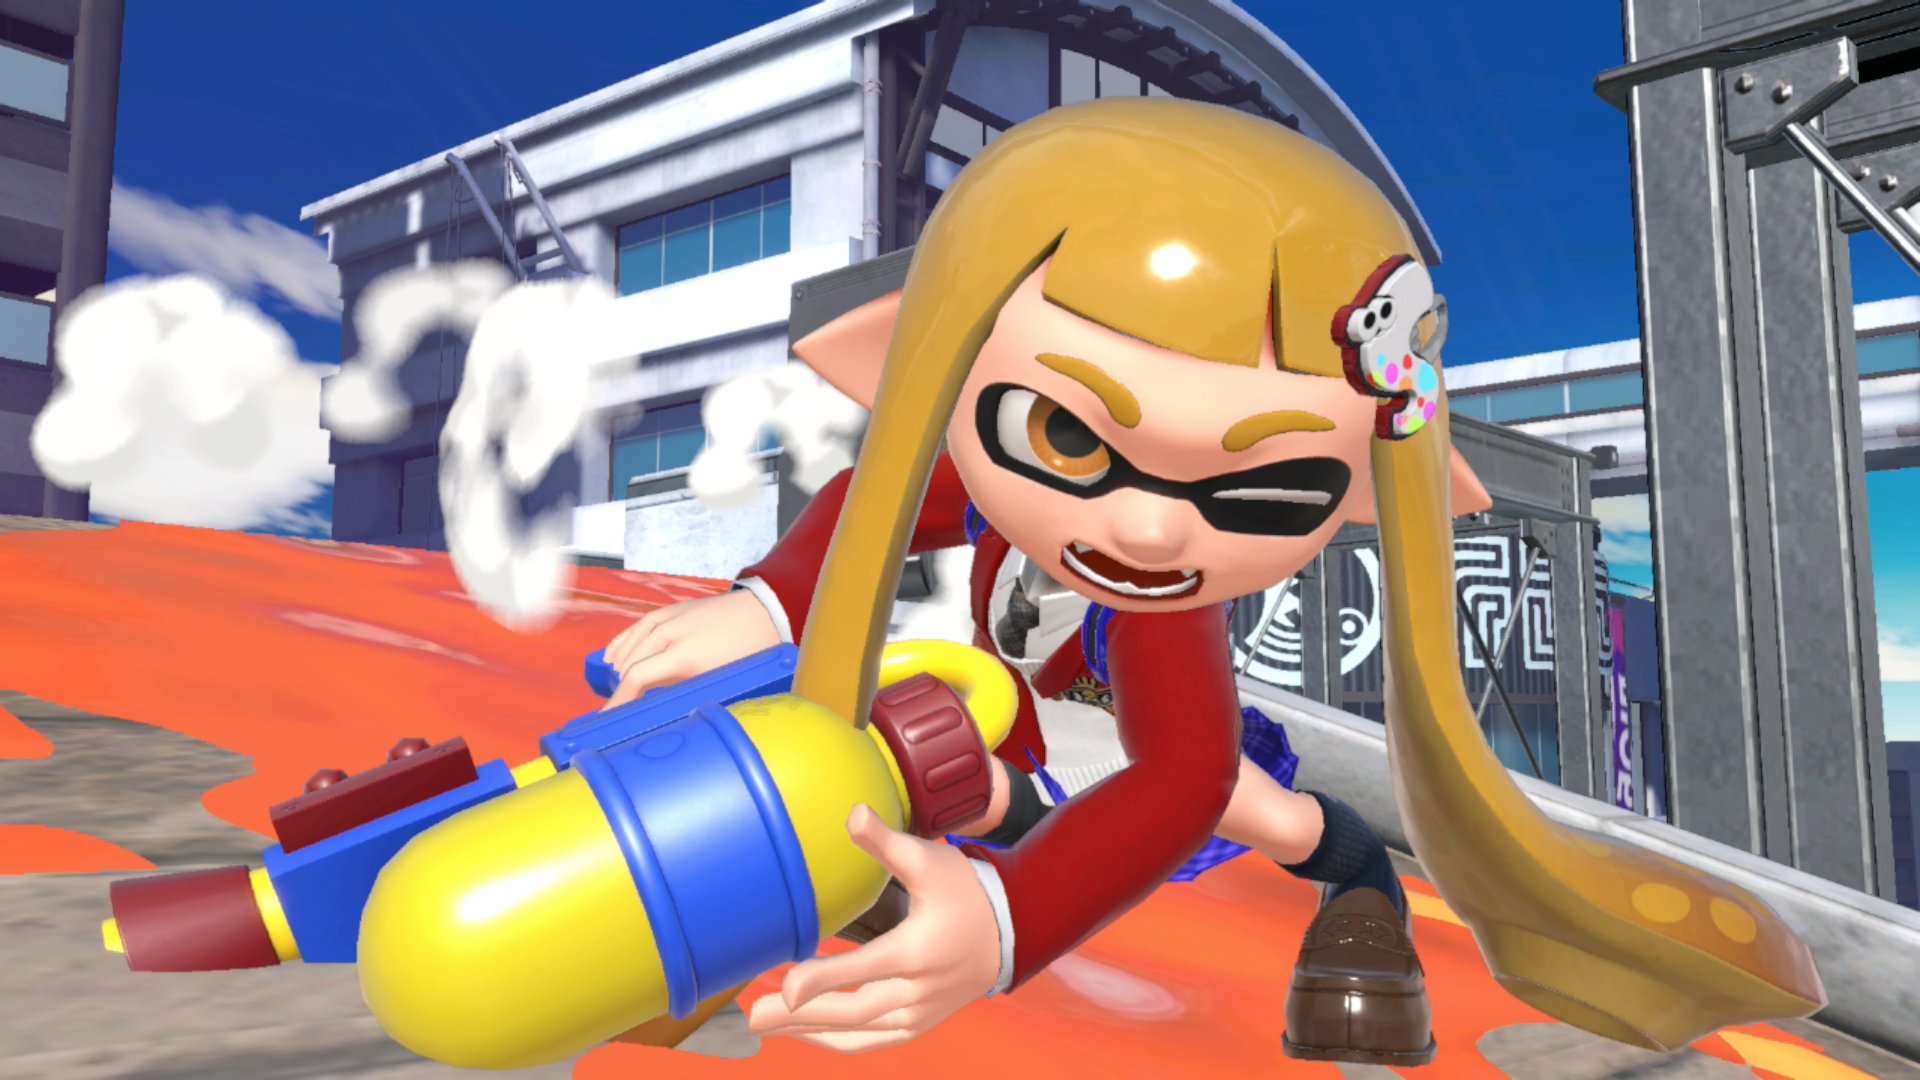 Devory on X: I made a Taiga Aisaka skin for Inkling from the